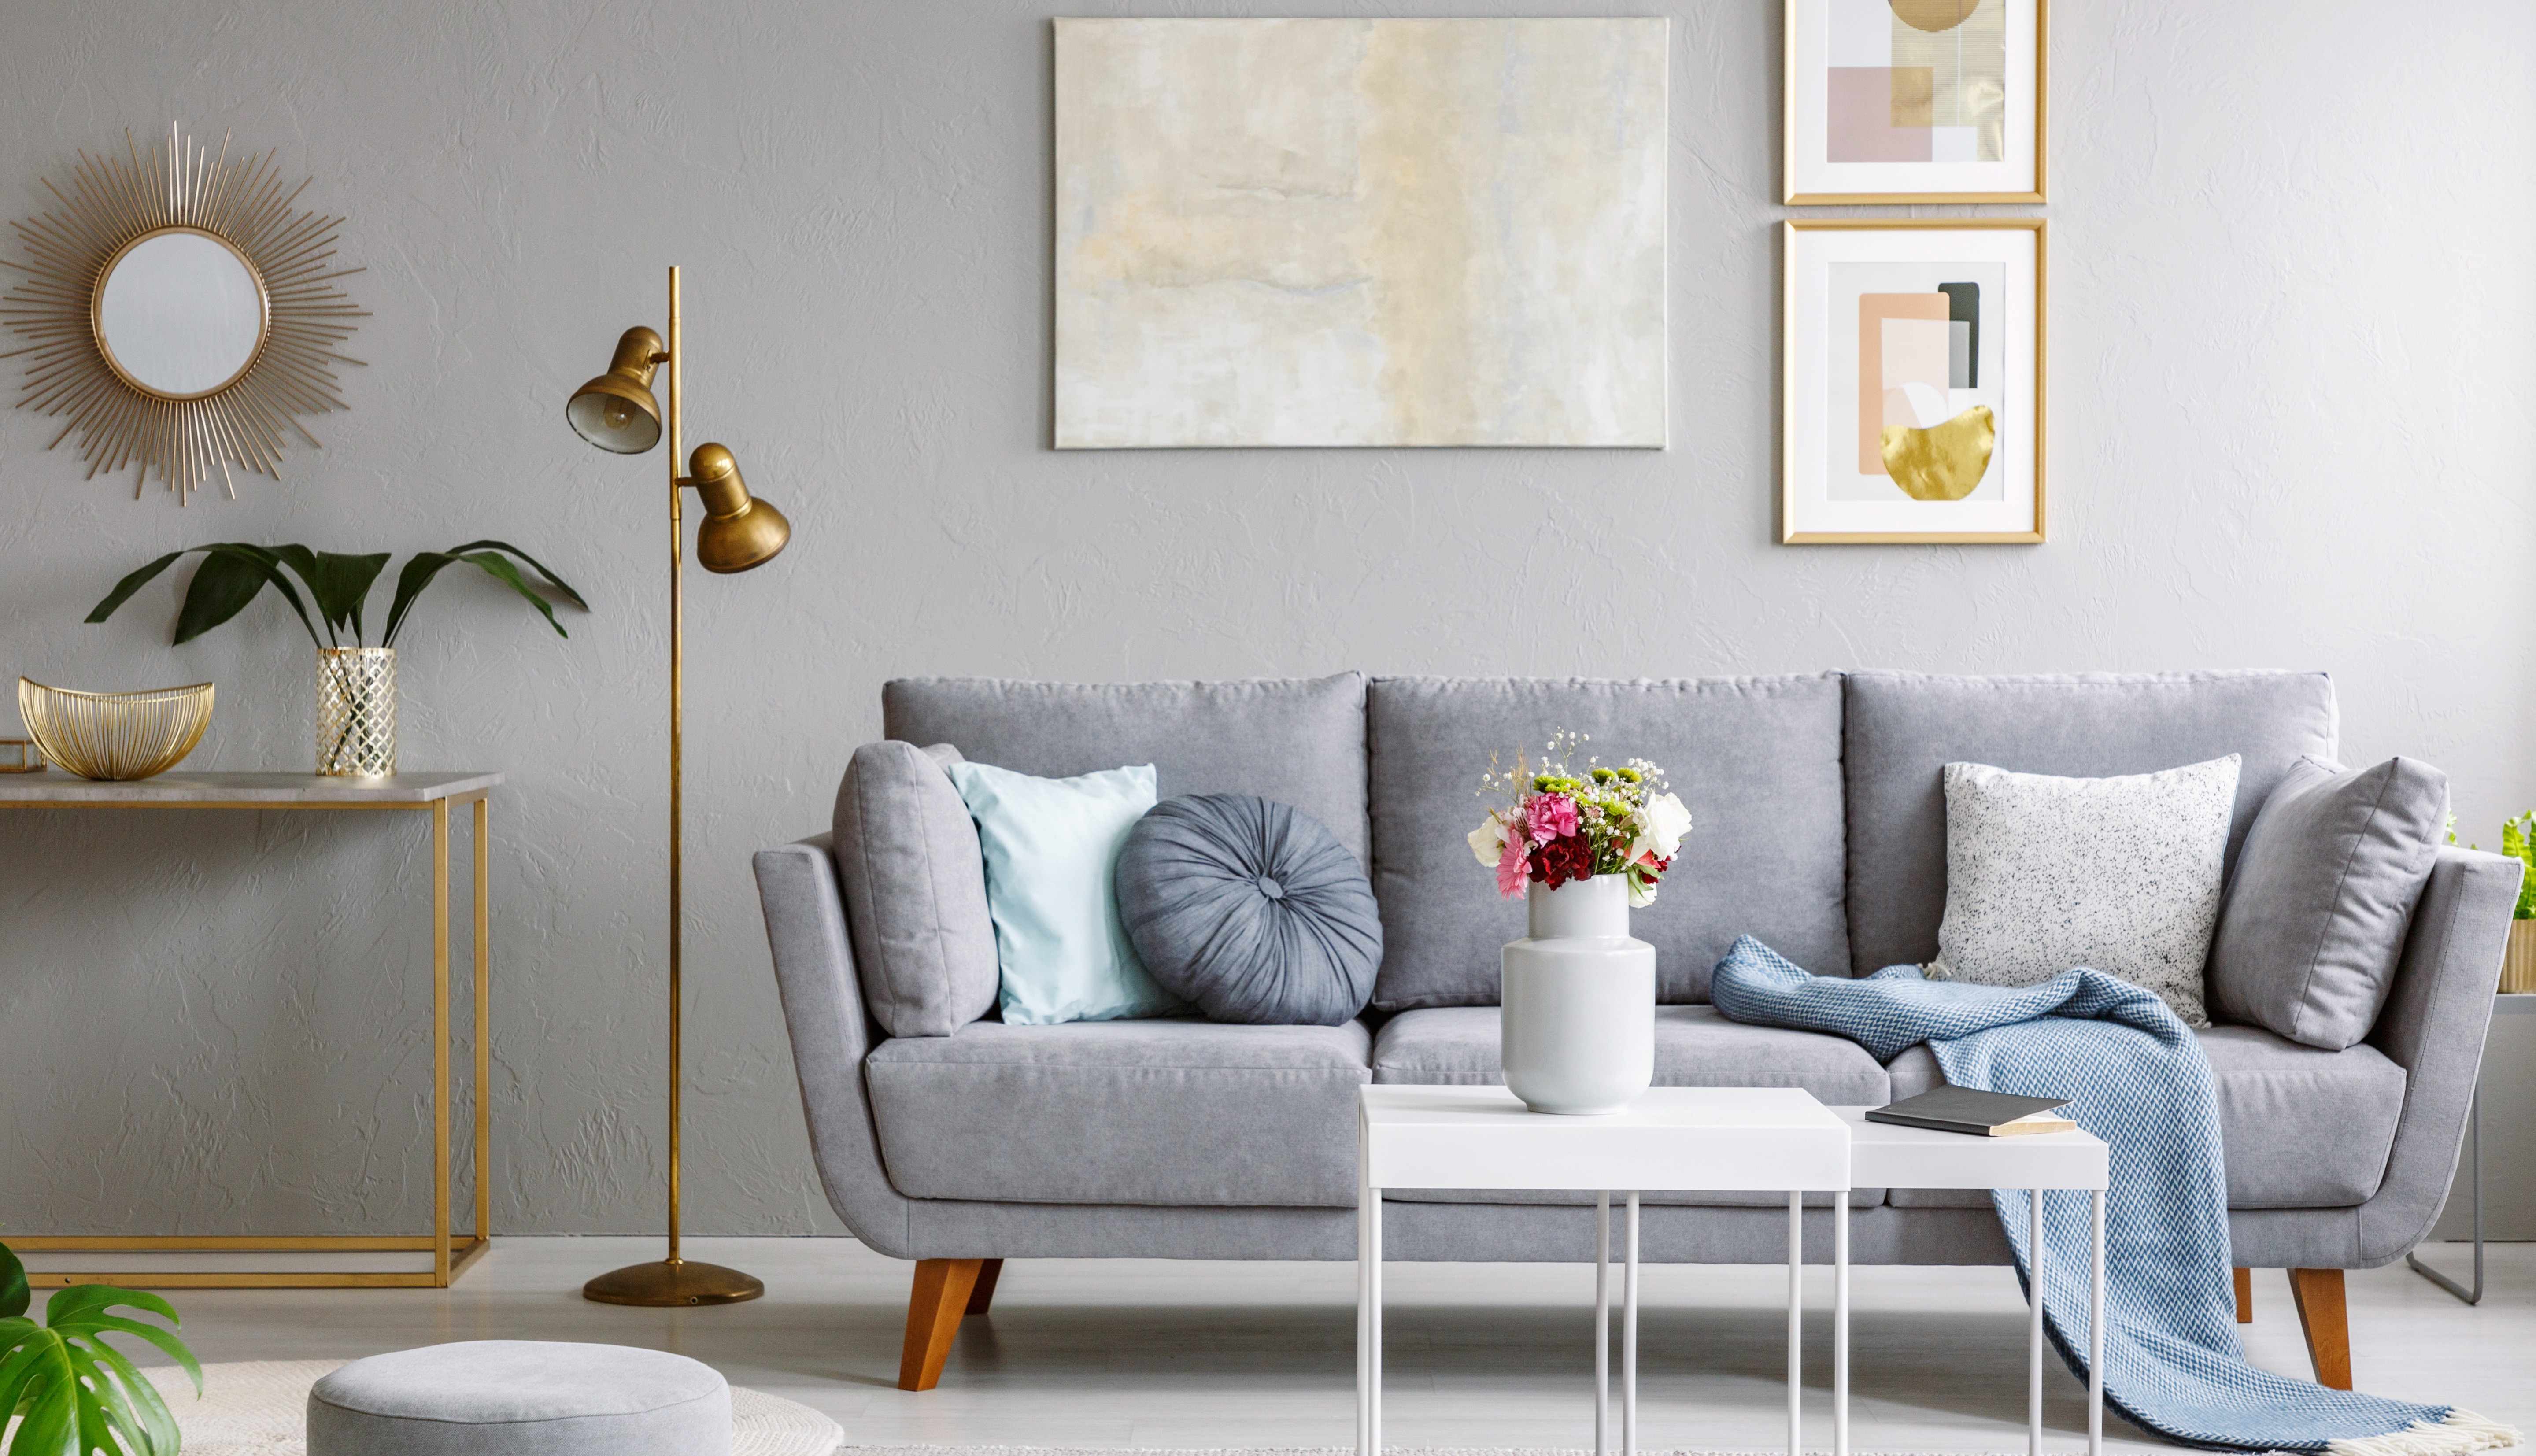 8 Secrets for a Cozier and Warmer Apartment Cover Photo